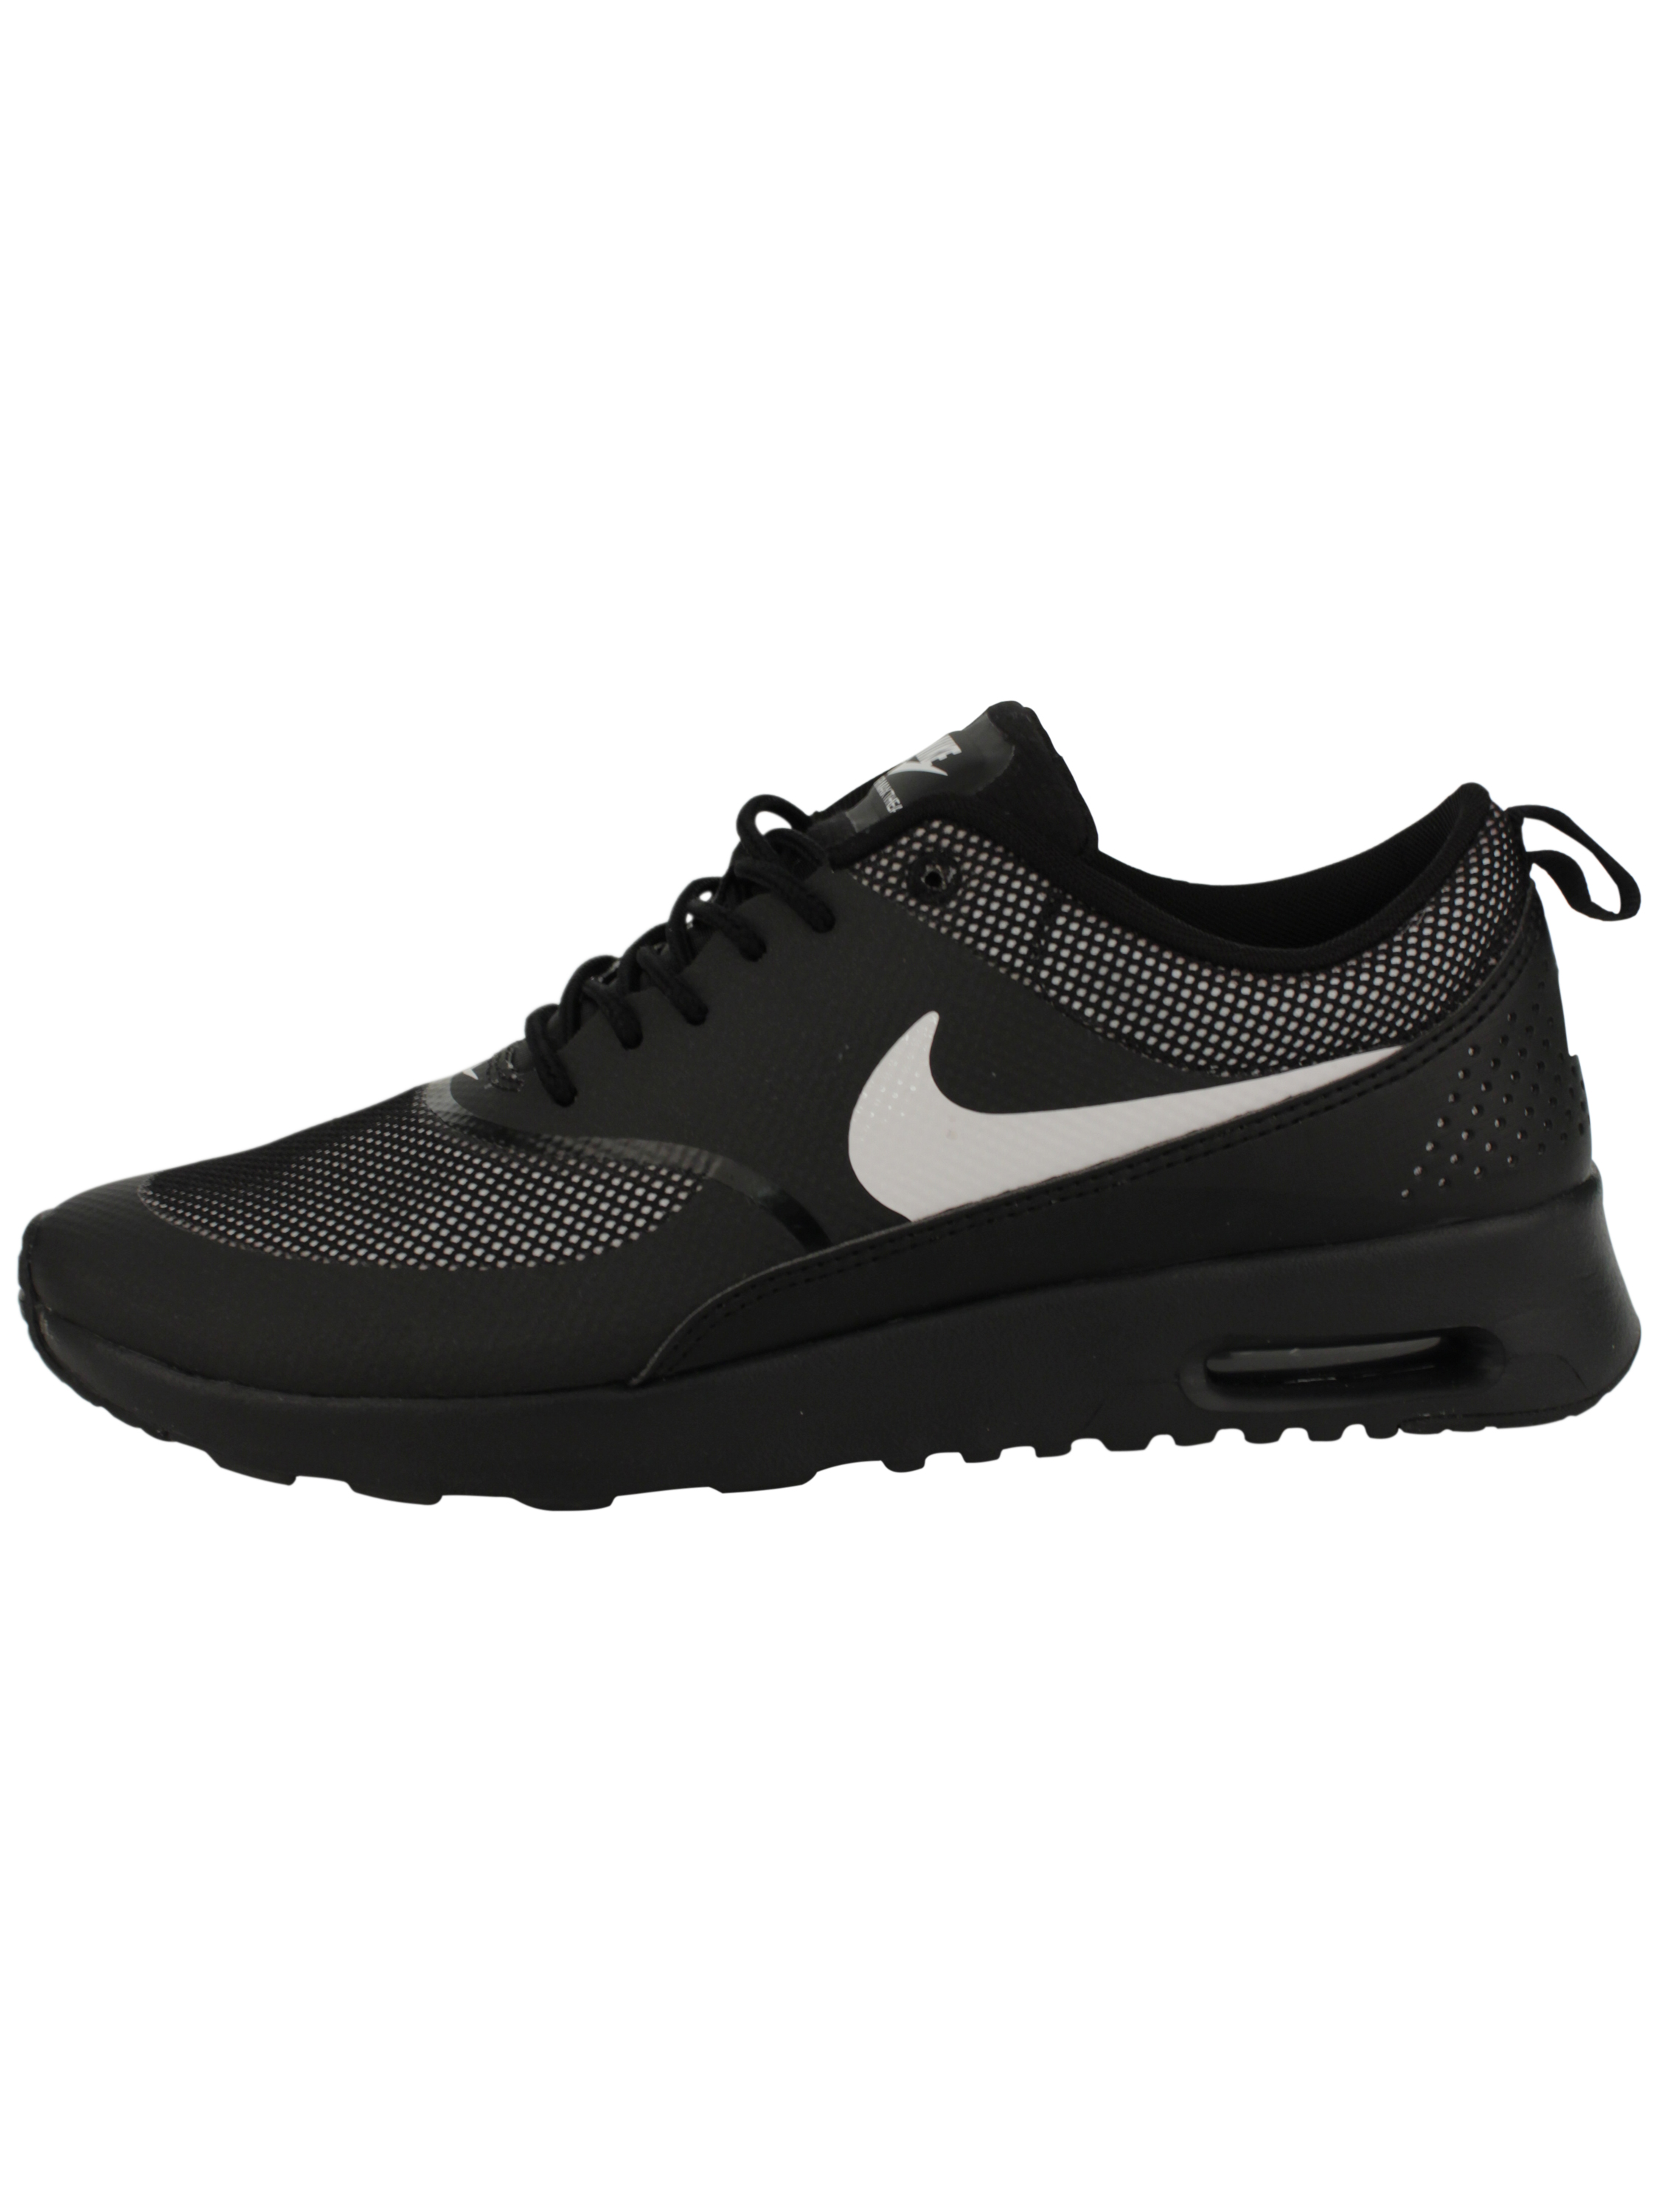 nike air max thea shoes online